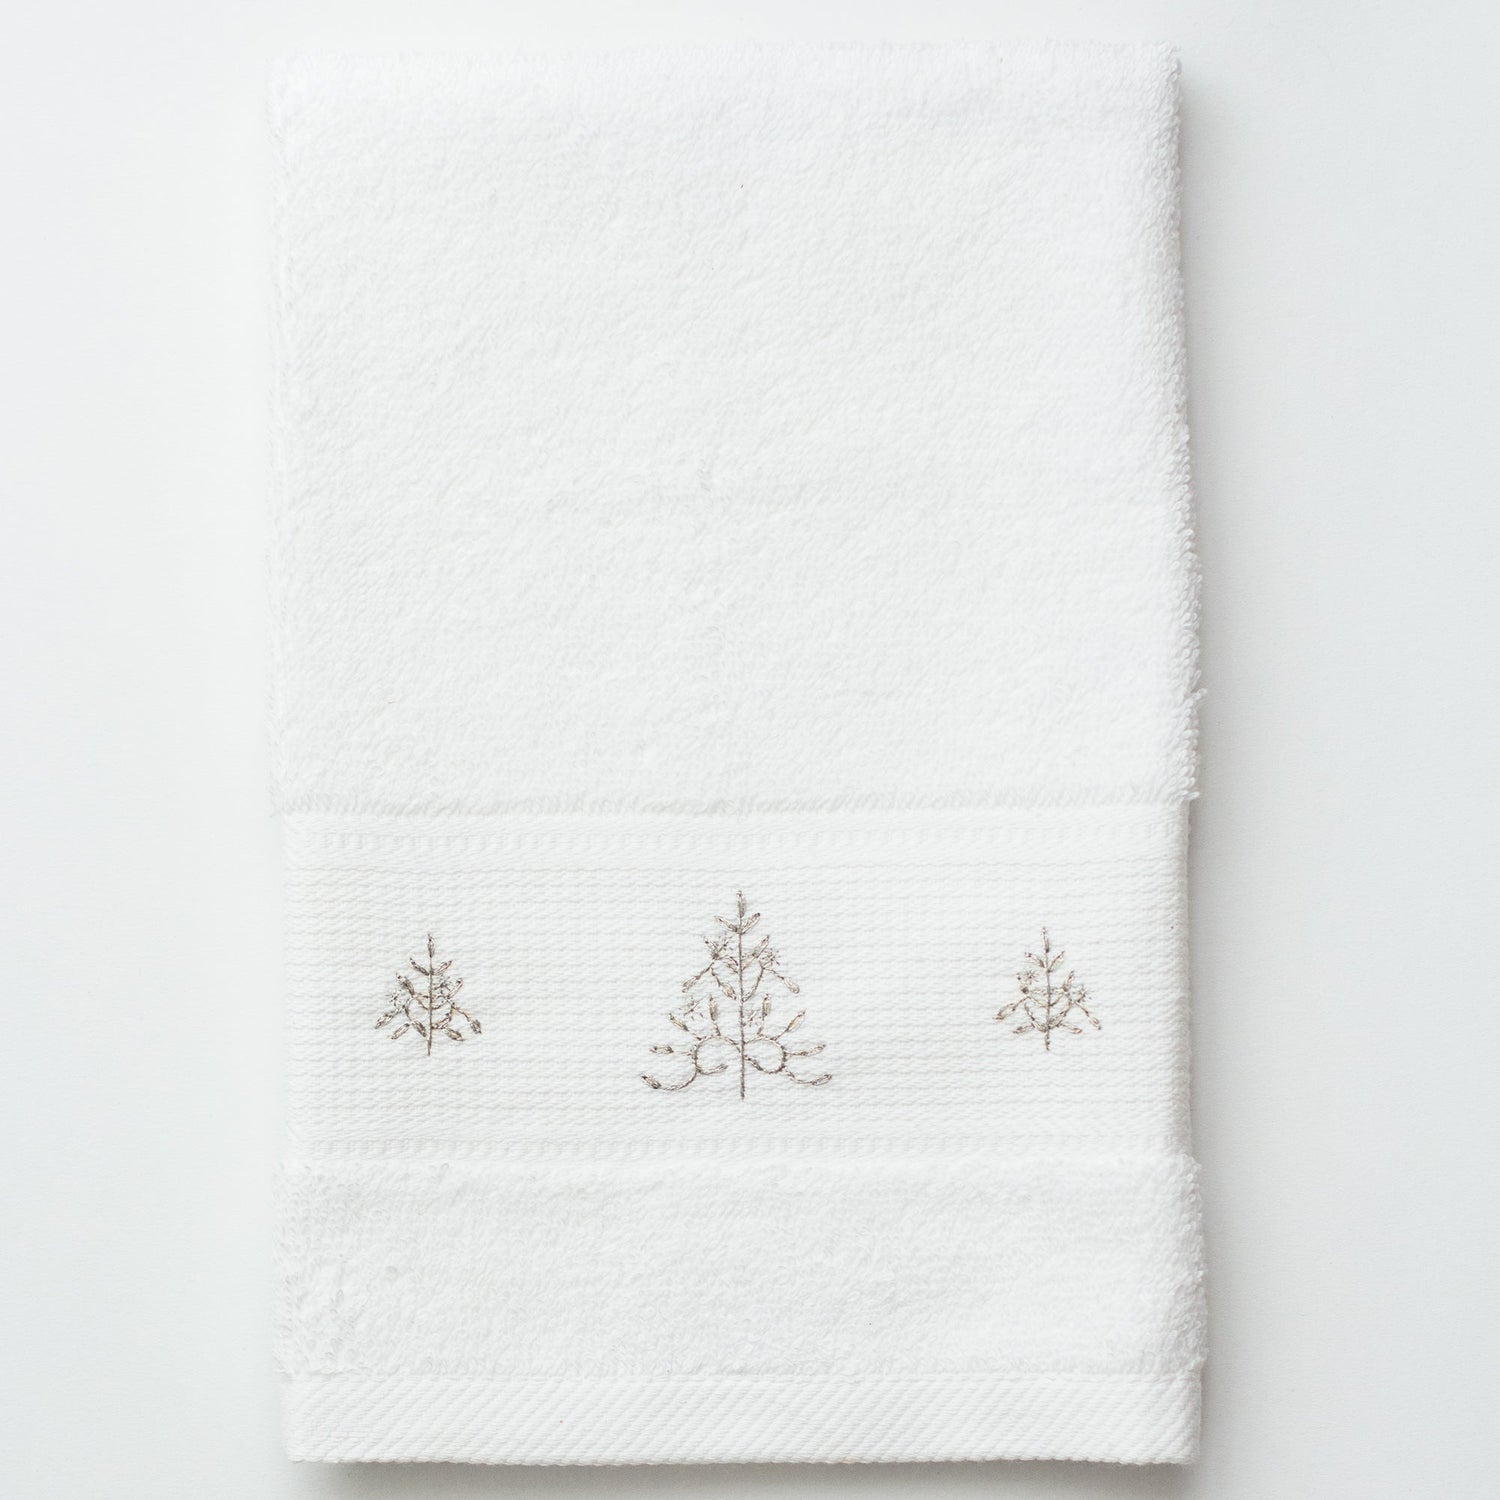 A white terry towel. 3 glittering silver christmas trees are embroiderevd in the center